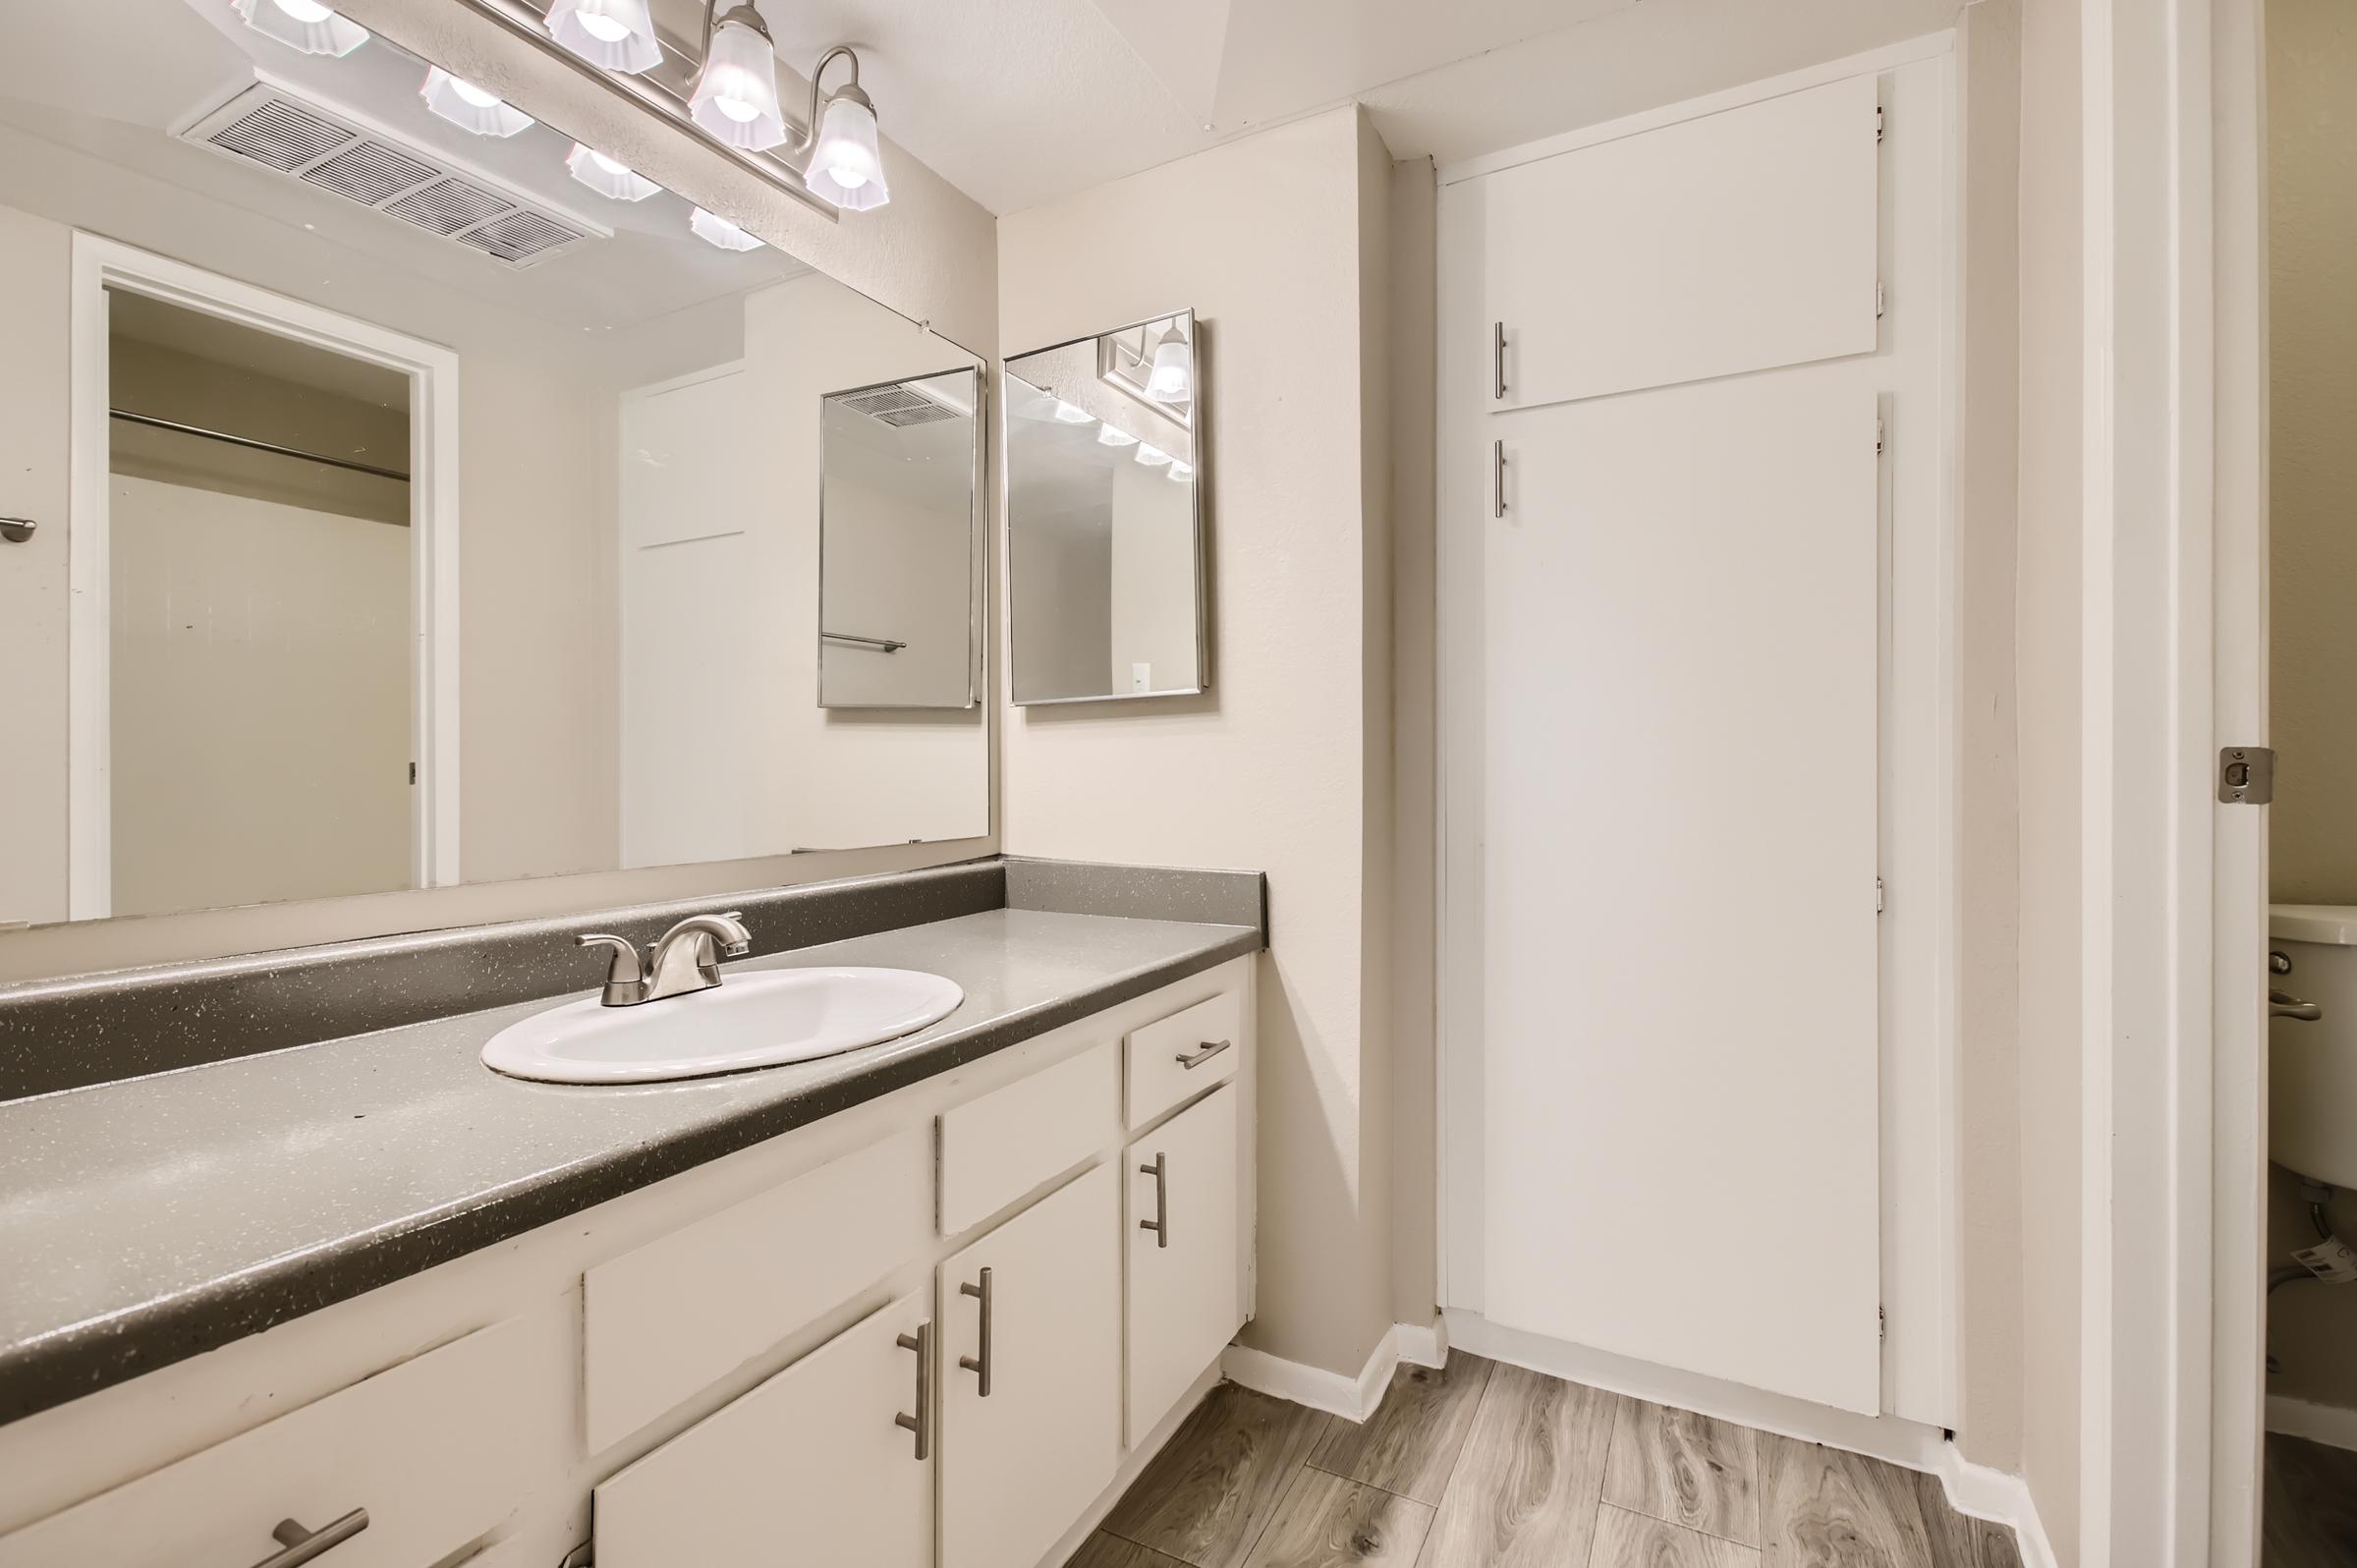 Rise Desert Cove apartment bathroom with a sink and mirror on the left and a storage closet in the front